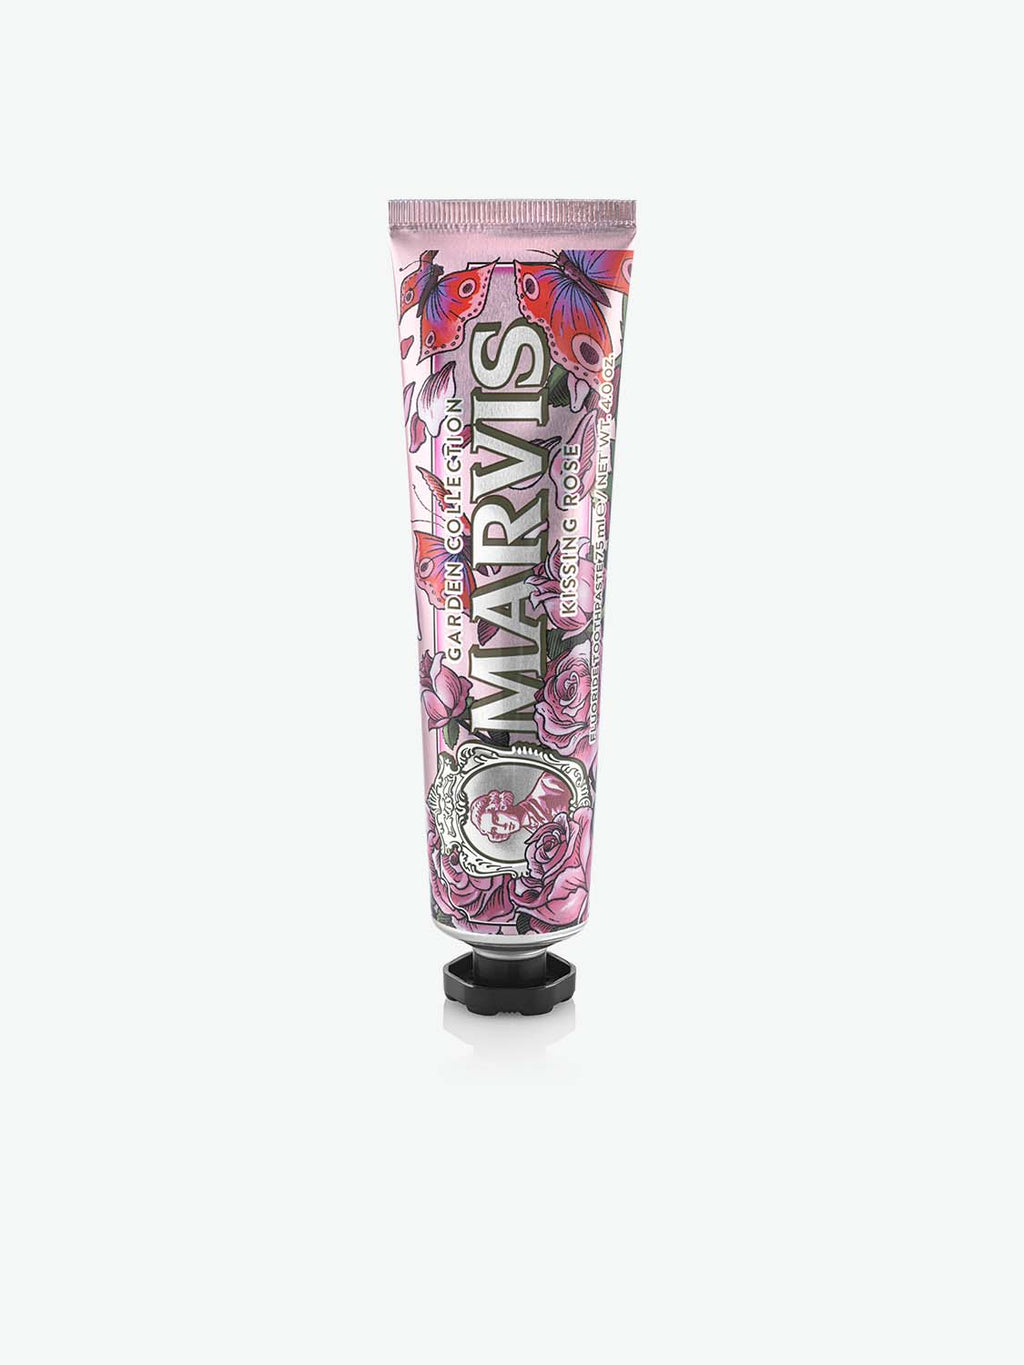 Marvis Kissing Rose Limited Edition Toothpaste